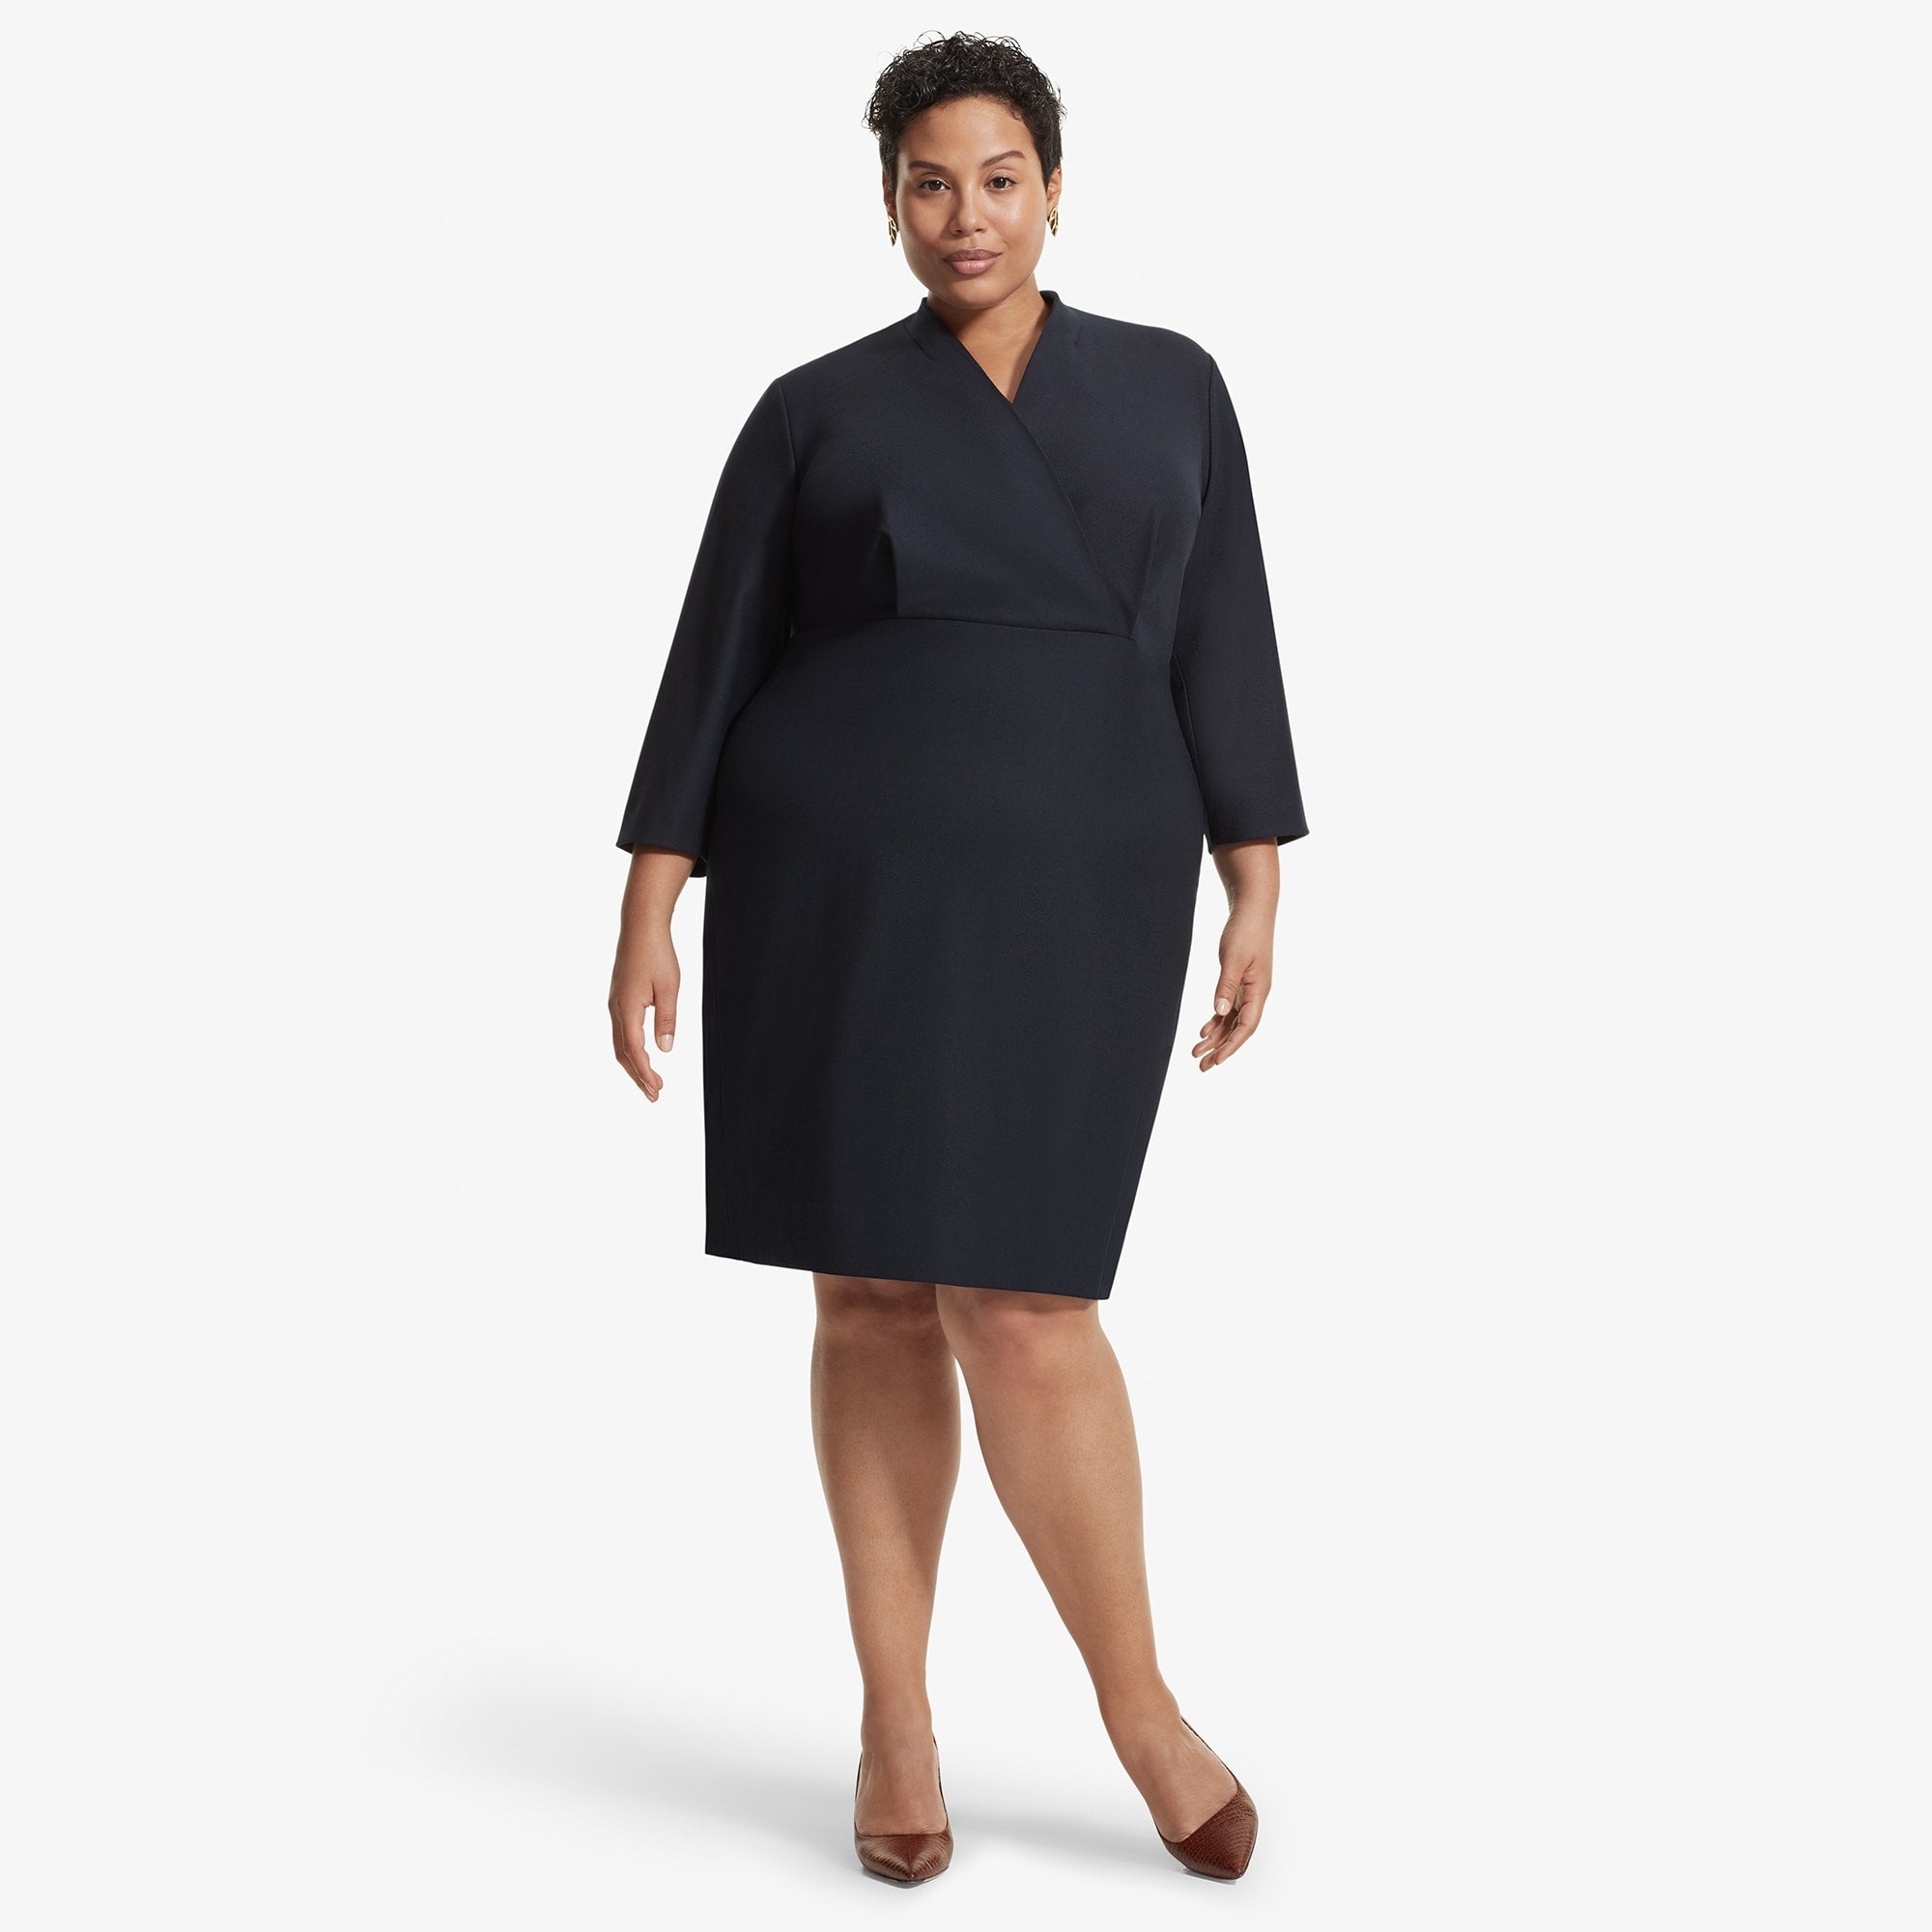 Front image of a woman standing wearing the Niko dress sharkskin in Ink